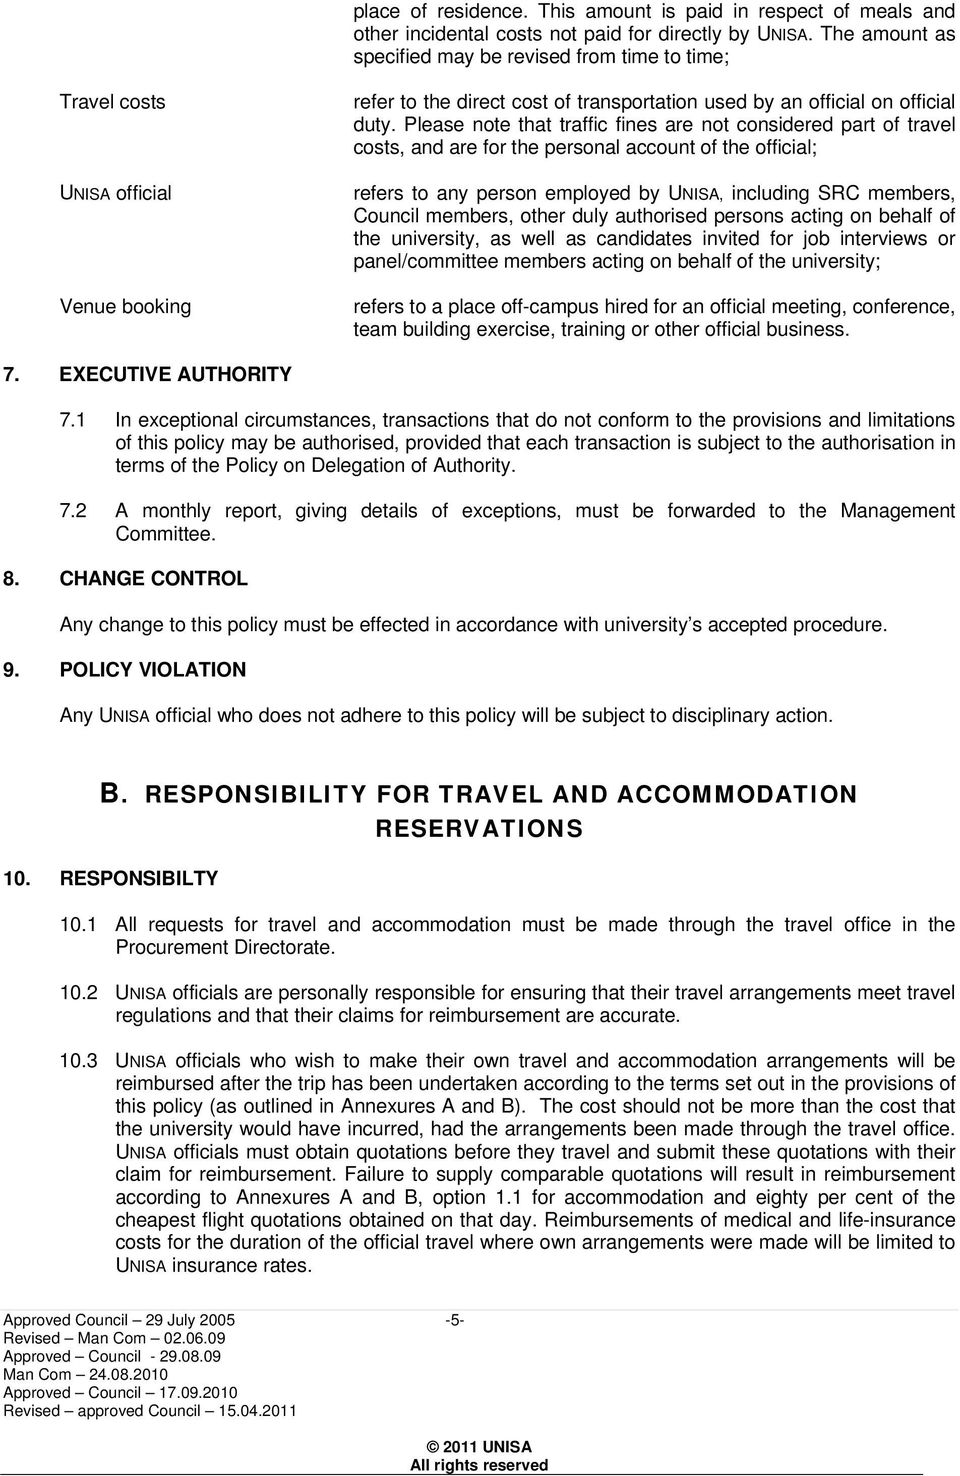 Please note that traffic fines are not considered part of travel costs, and are for the personal account of the official; refers to any person employed by UNISA, including SRC members, Council